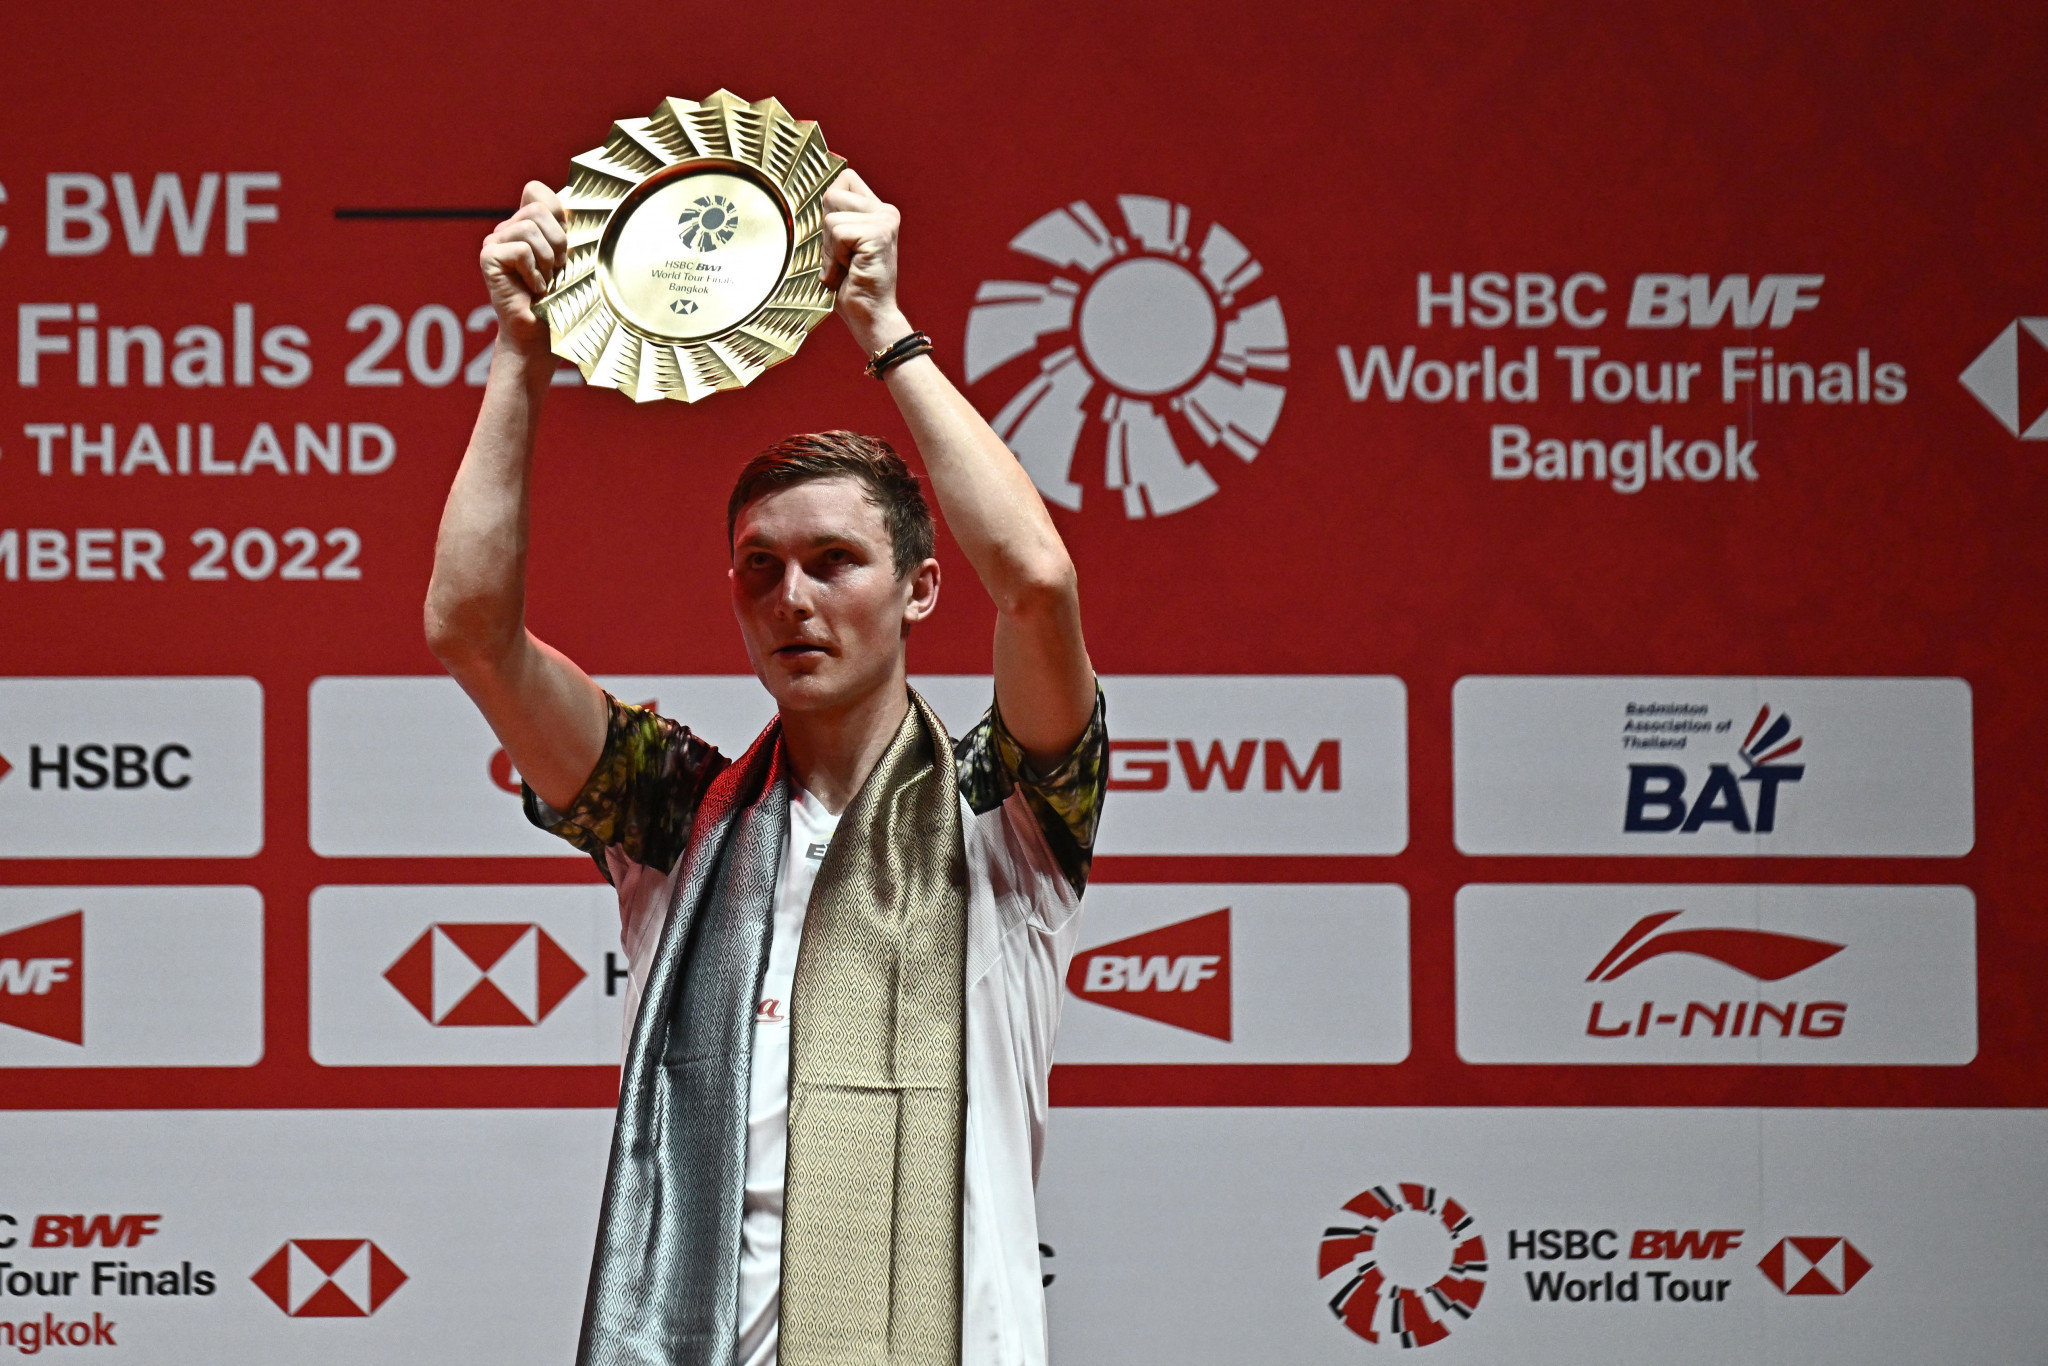 Denmark's Viktor Axelsen won the men's singles title after the 2022 BWF World Tour Finals was moved from Guangzhou to Bangkok ©Getty Images